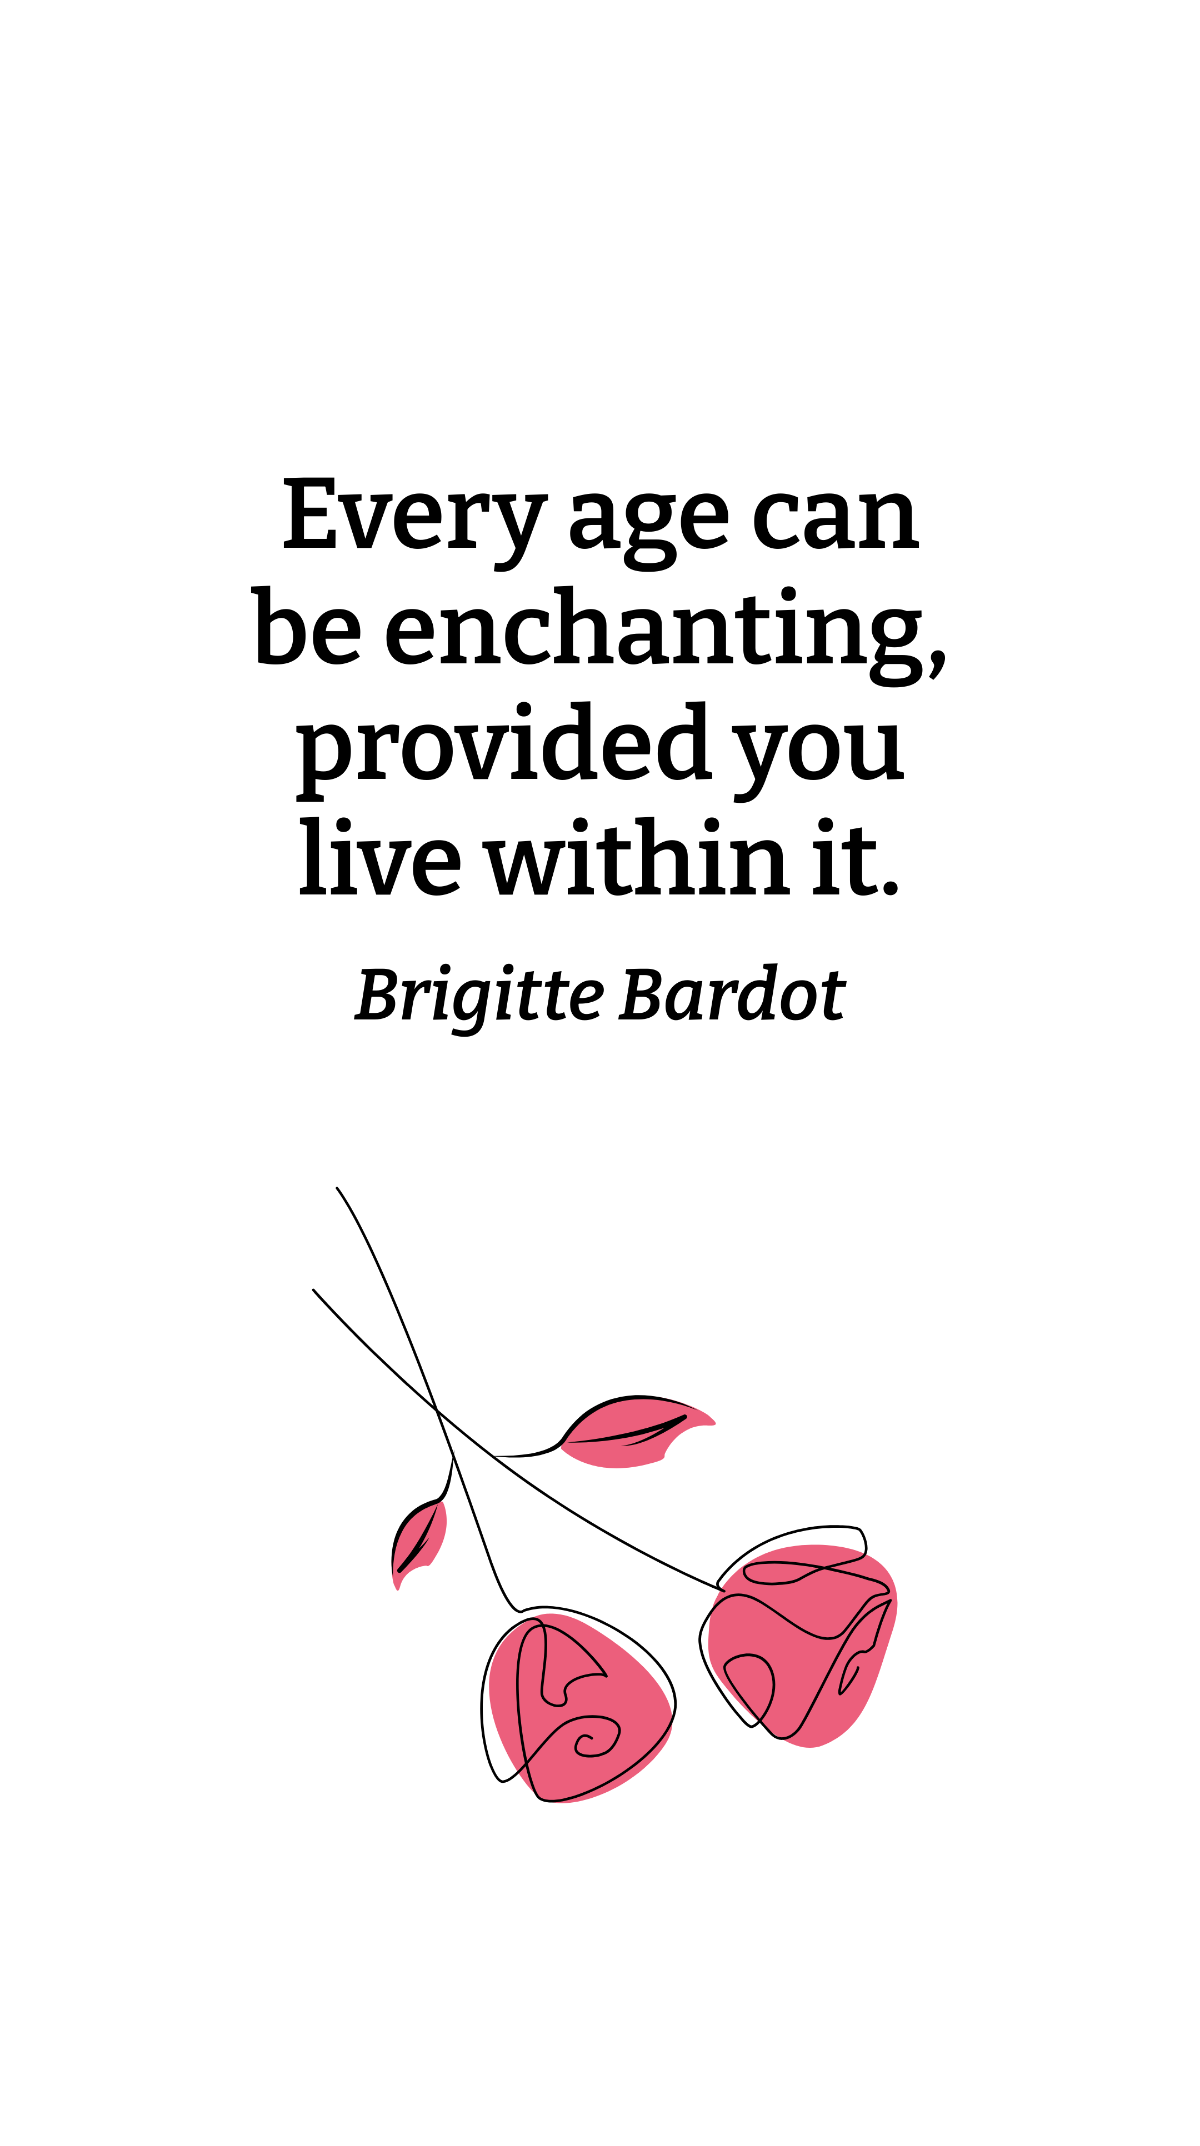 Brigitte Bardot - Every age can be enchanting, provided you live within it. Template